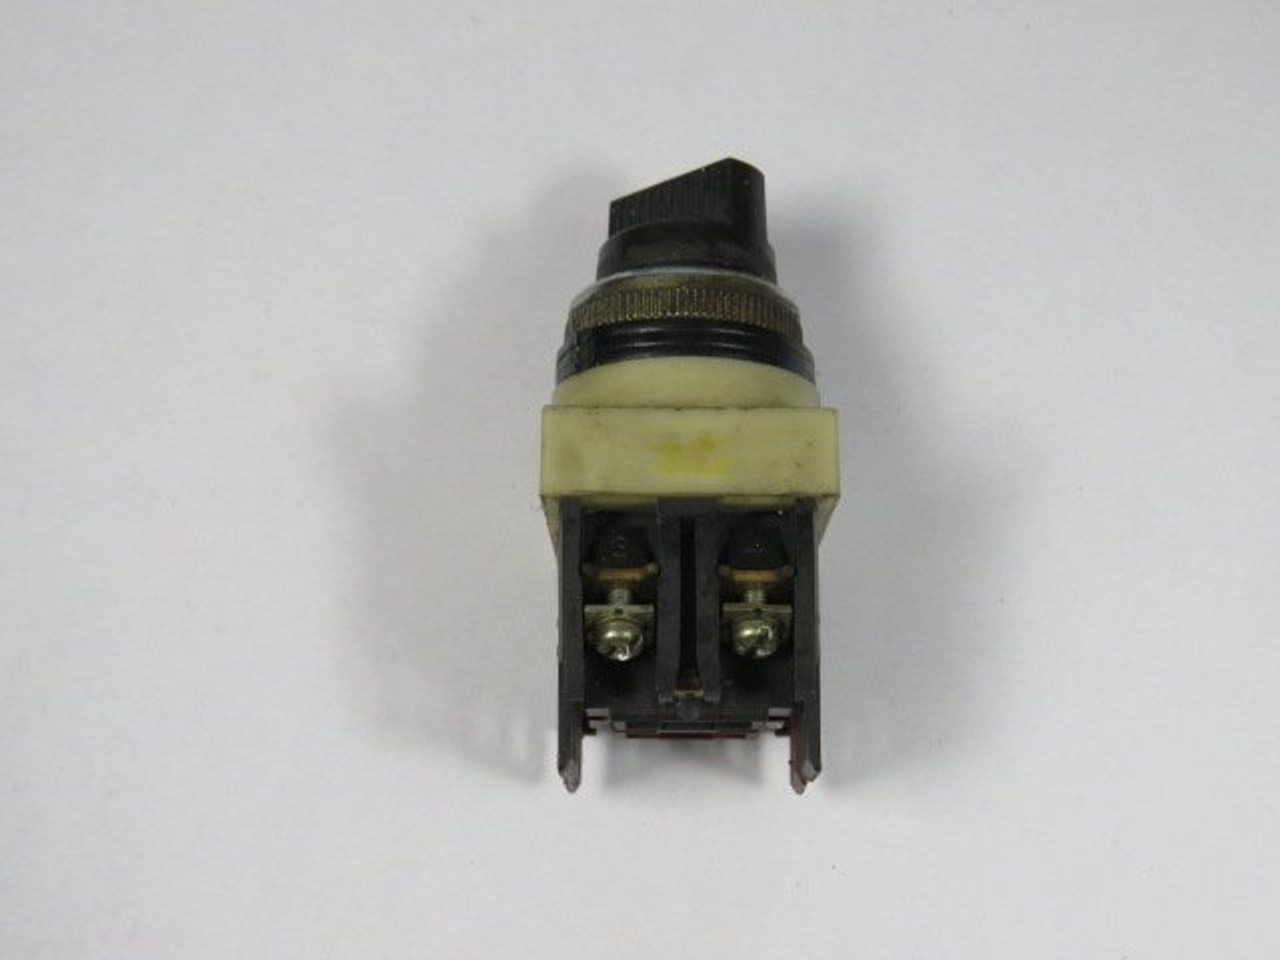 Fuji Electric Ah25 P2b11 Selector Switch 1no1nc 2 Position Used